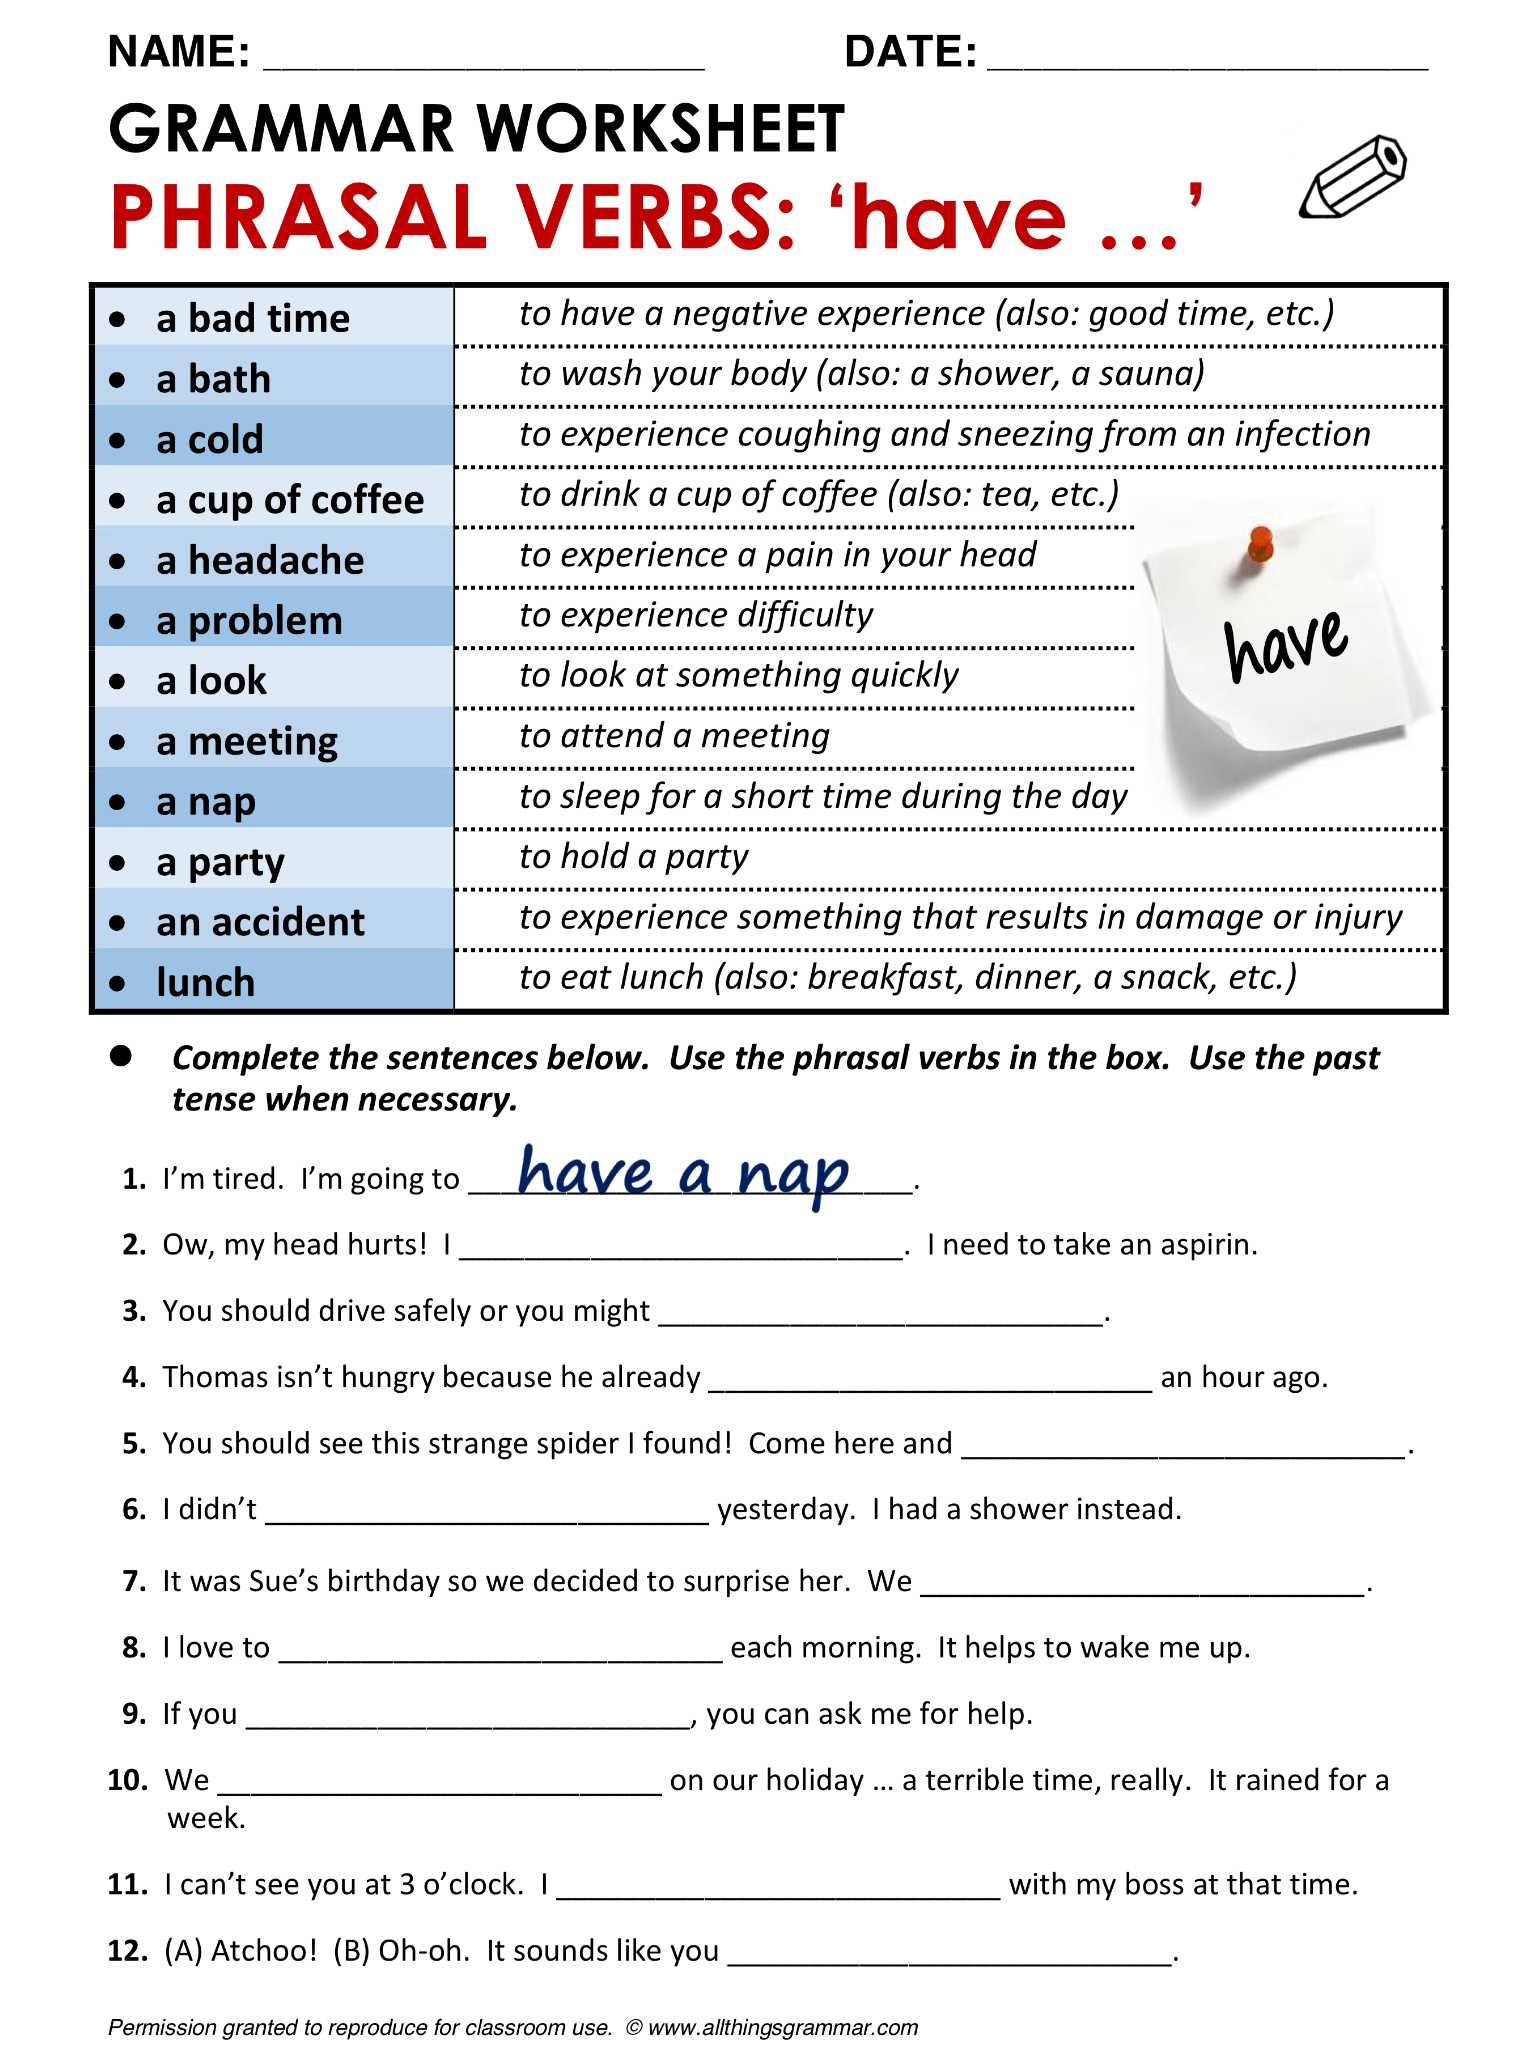 Spanish Reflexive Verbs Worksheet Pdf together with Basic English Worksheets Lovely English Grammar Phrasal Verbs with